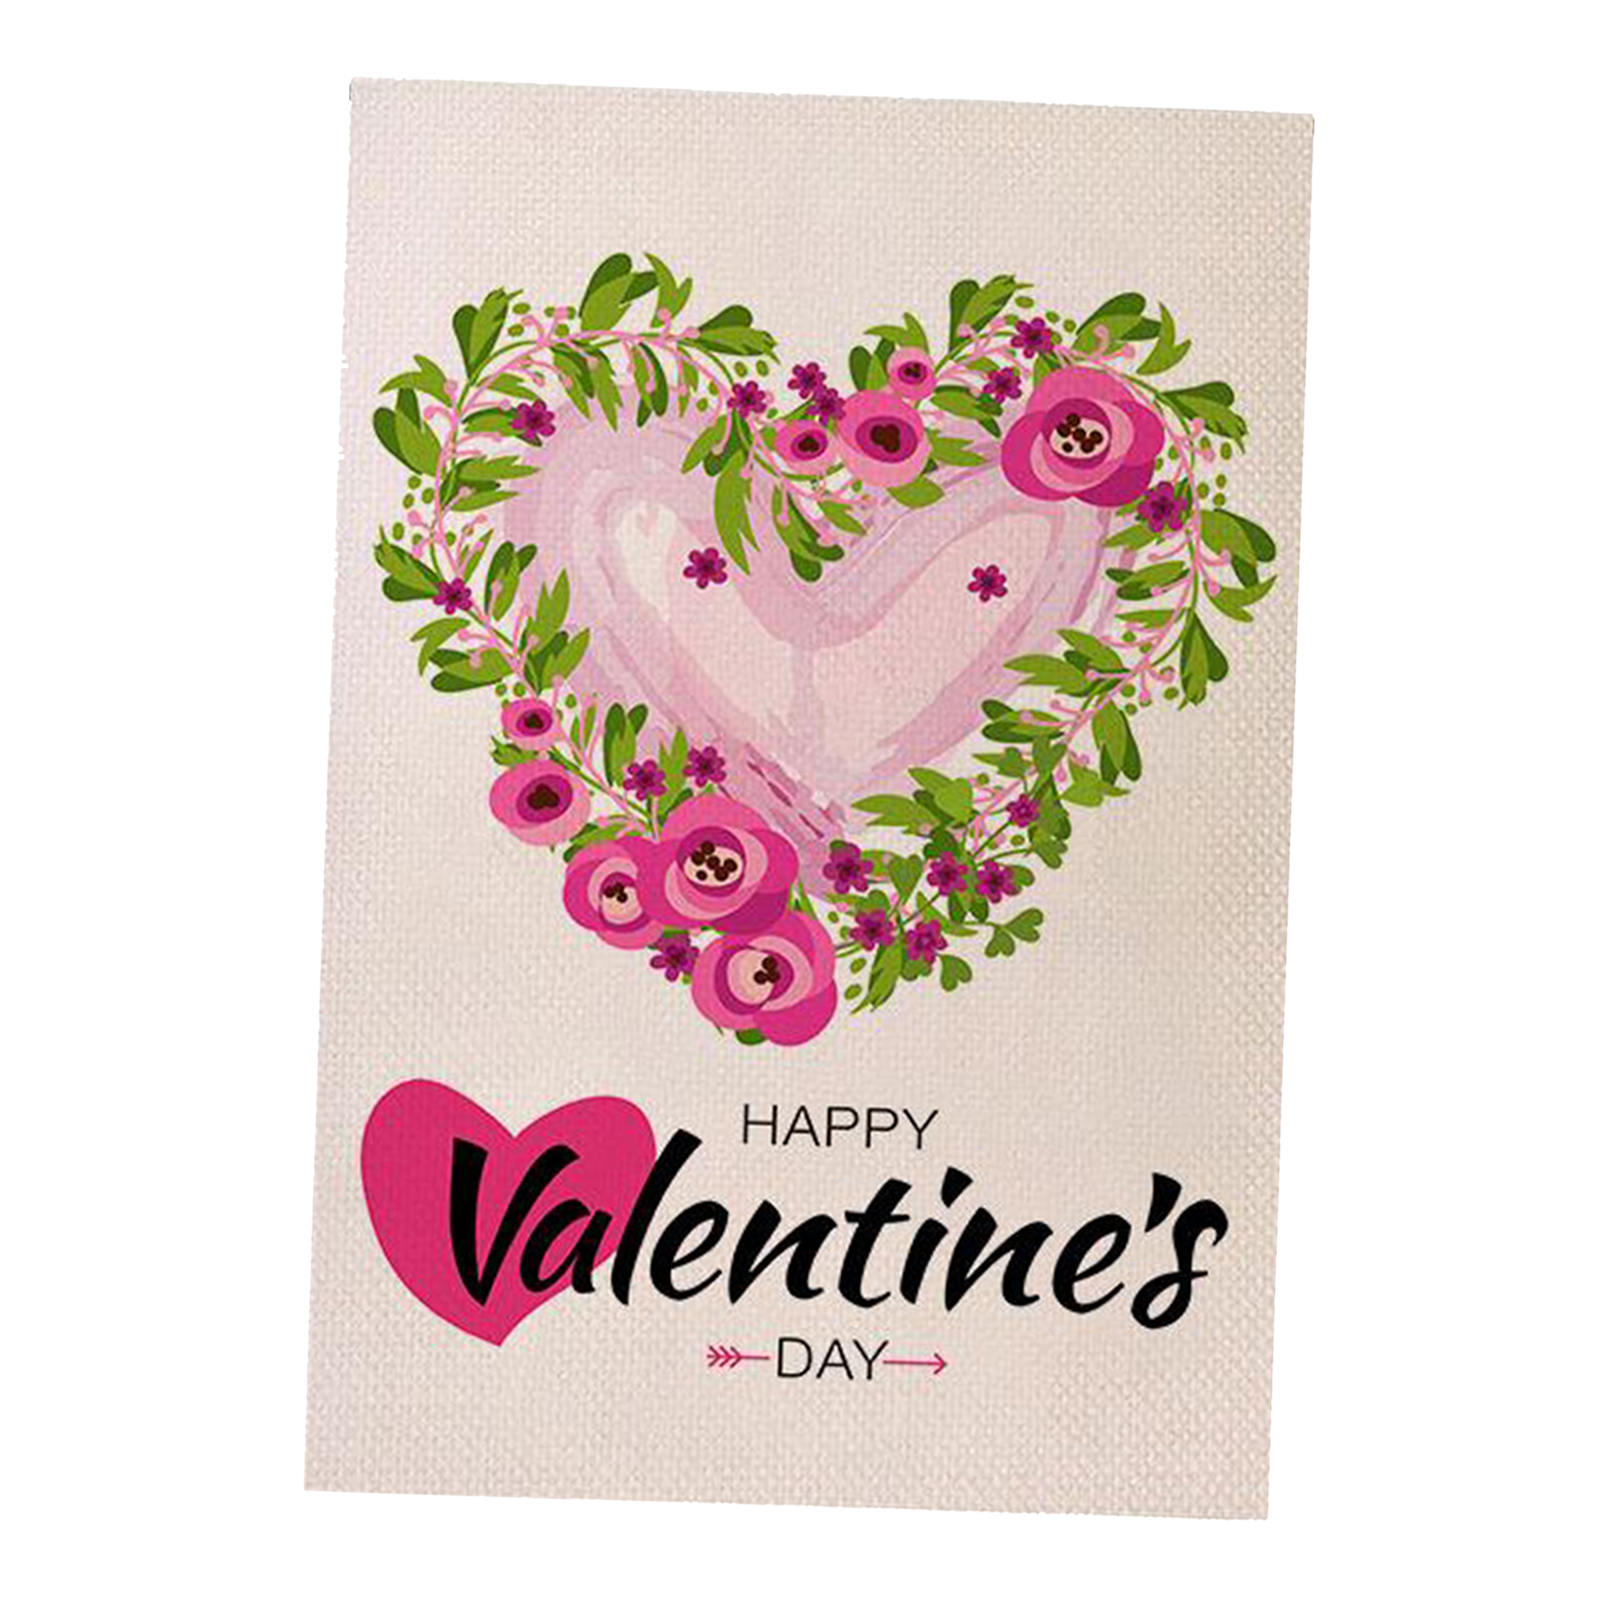 Happy Valentine's Day Flag House Yard Outdoor Outside Banner Leaf Flower